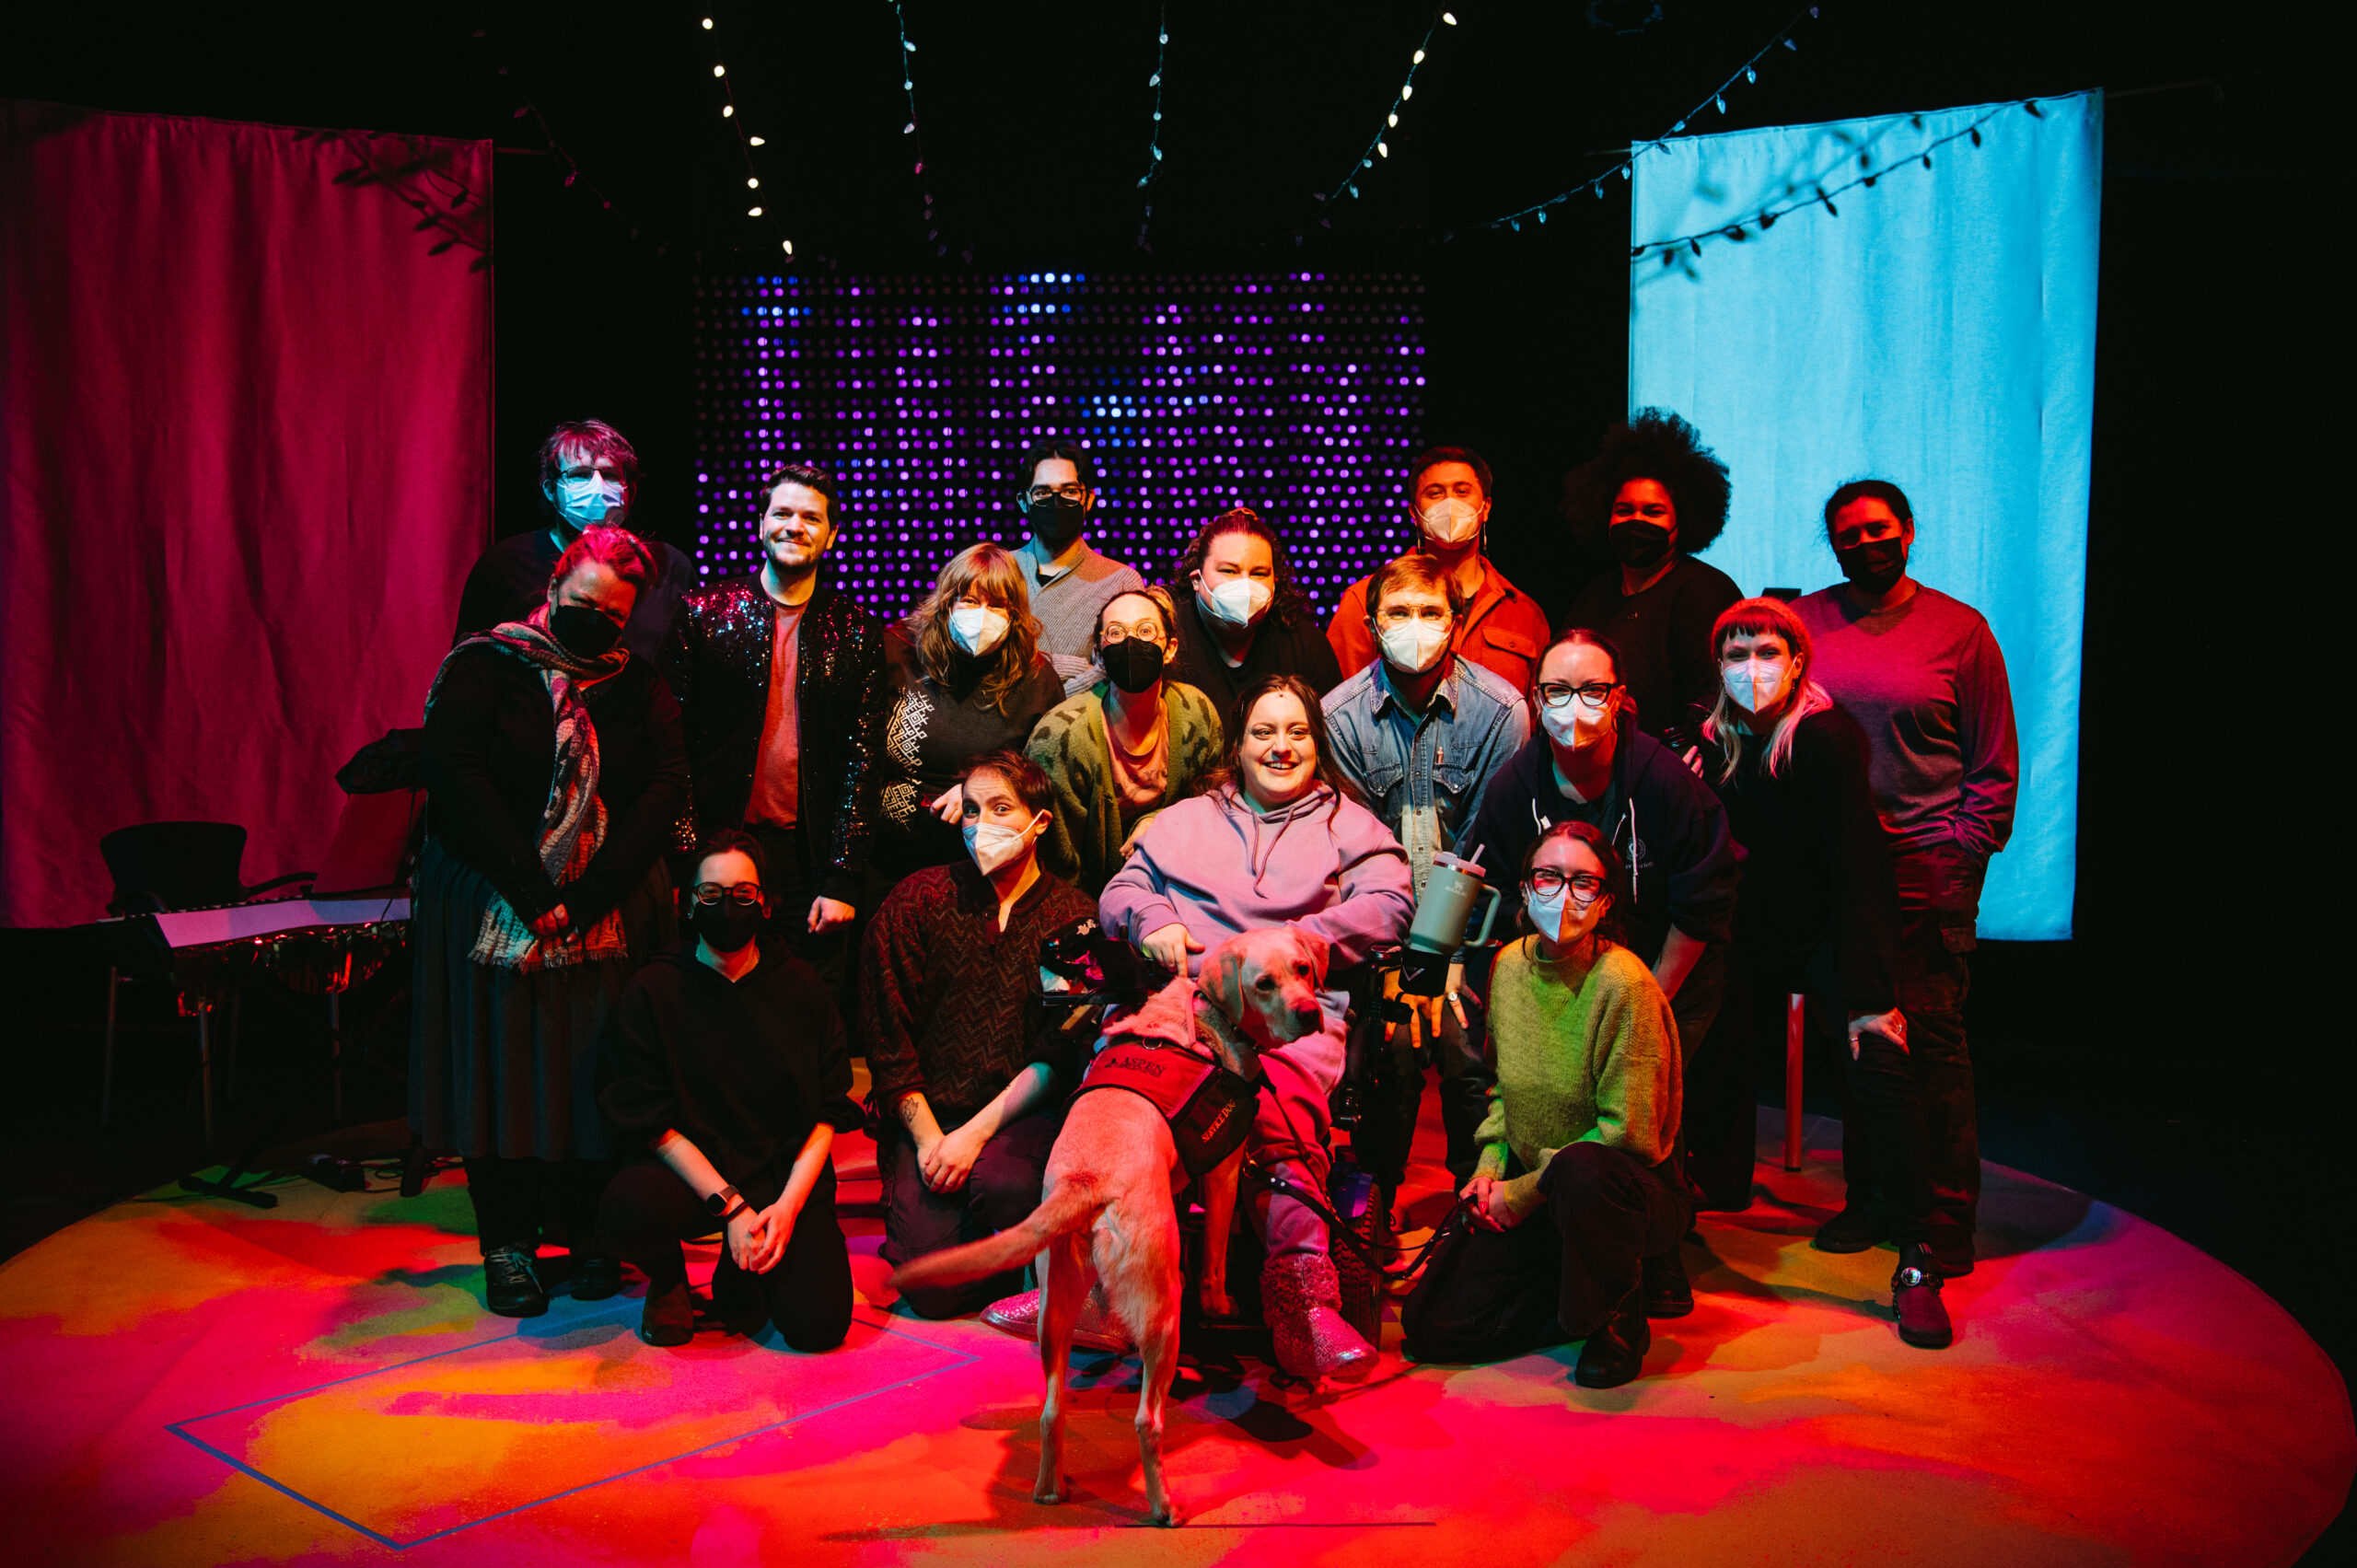 In My Own Little Corner cast and crew all center stage. Carley Neis is center with support dog Gilmore. She is surrounded by 16 team members wearing face masks. There are string lights overhead and a light wall behind the group.